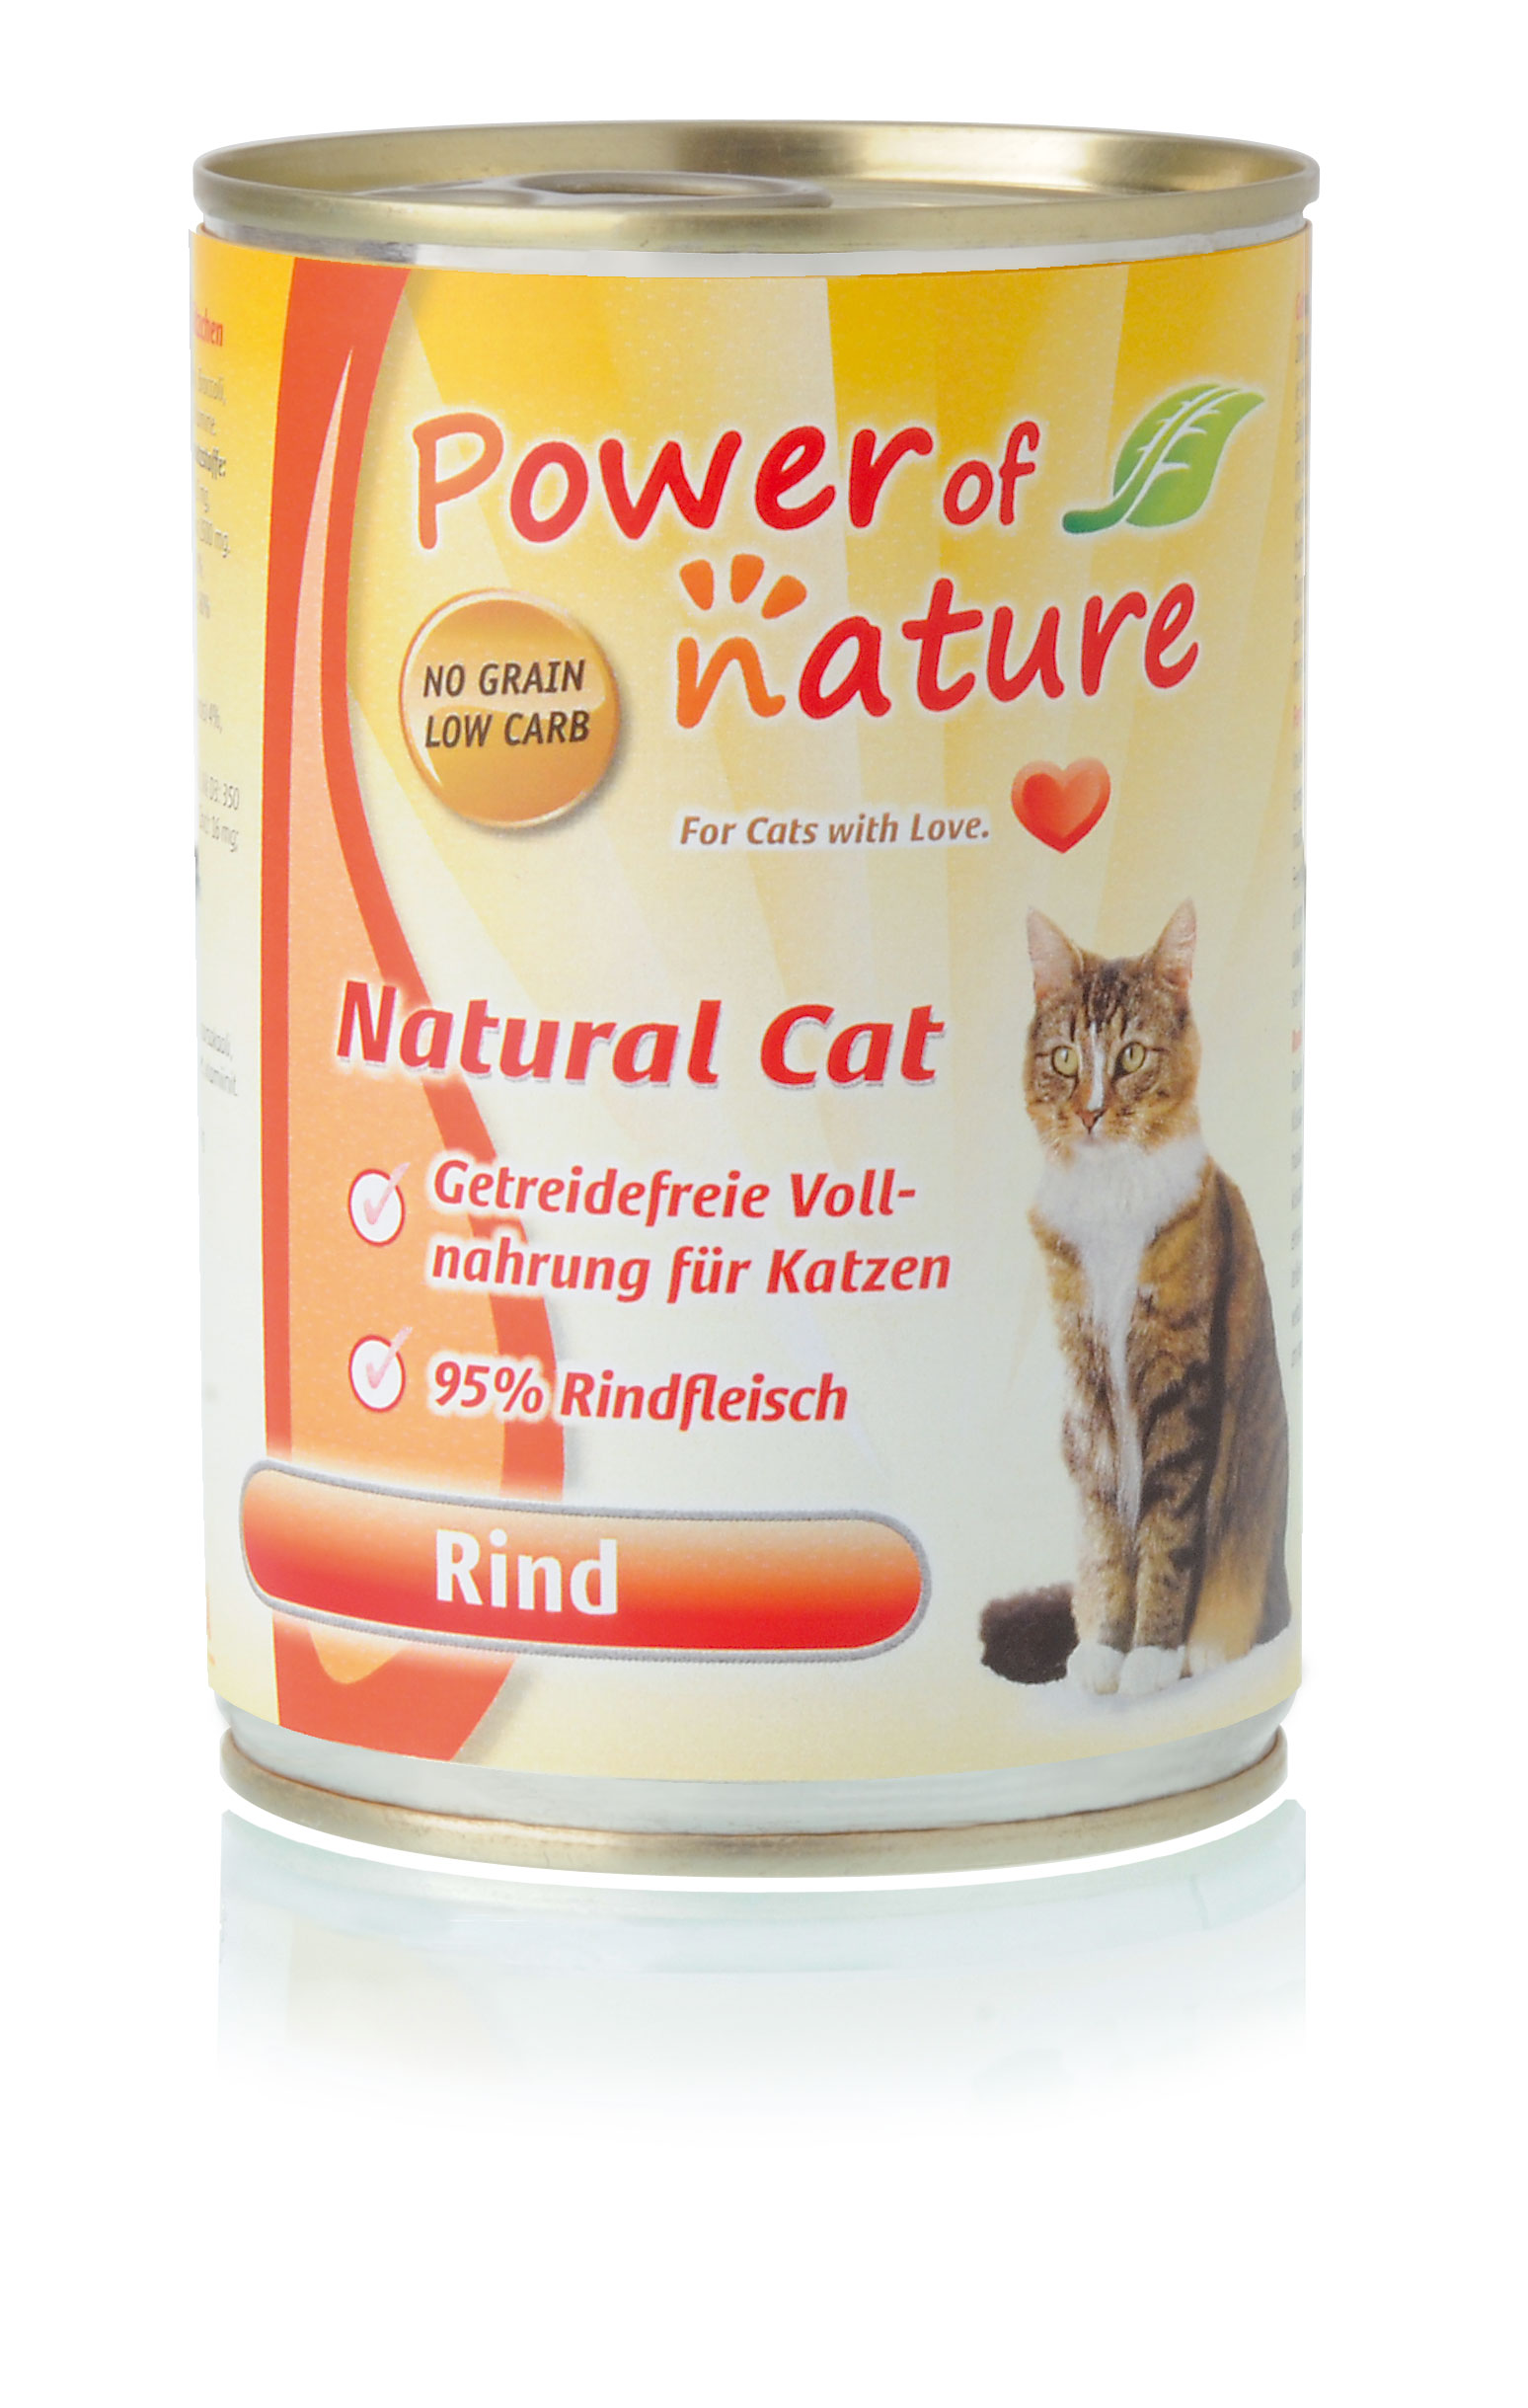 Power of Nature Natural Cat Dose Rind 24 x 400g